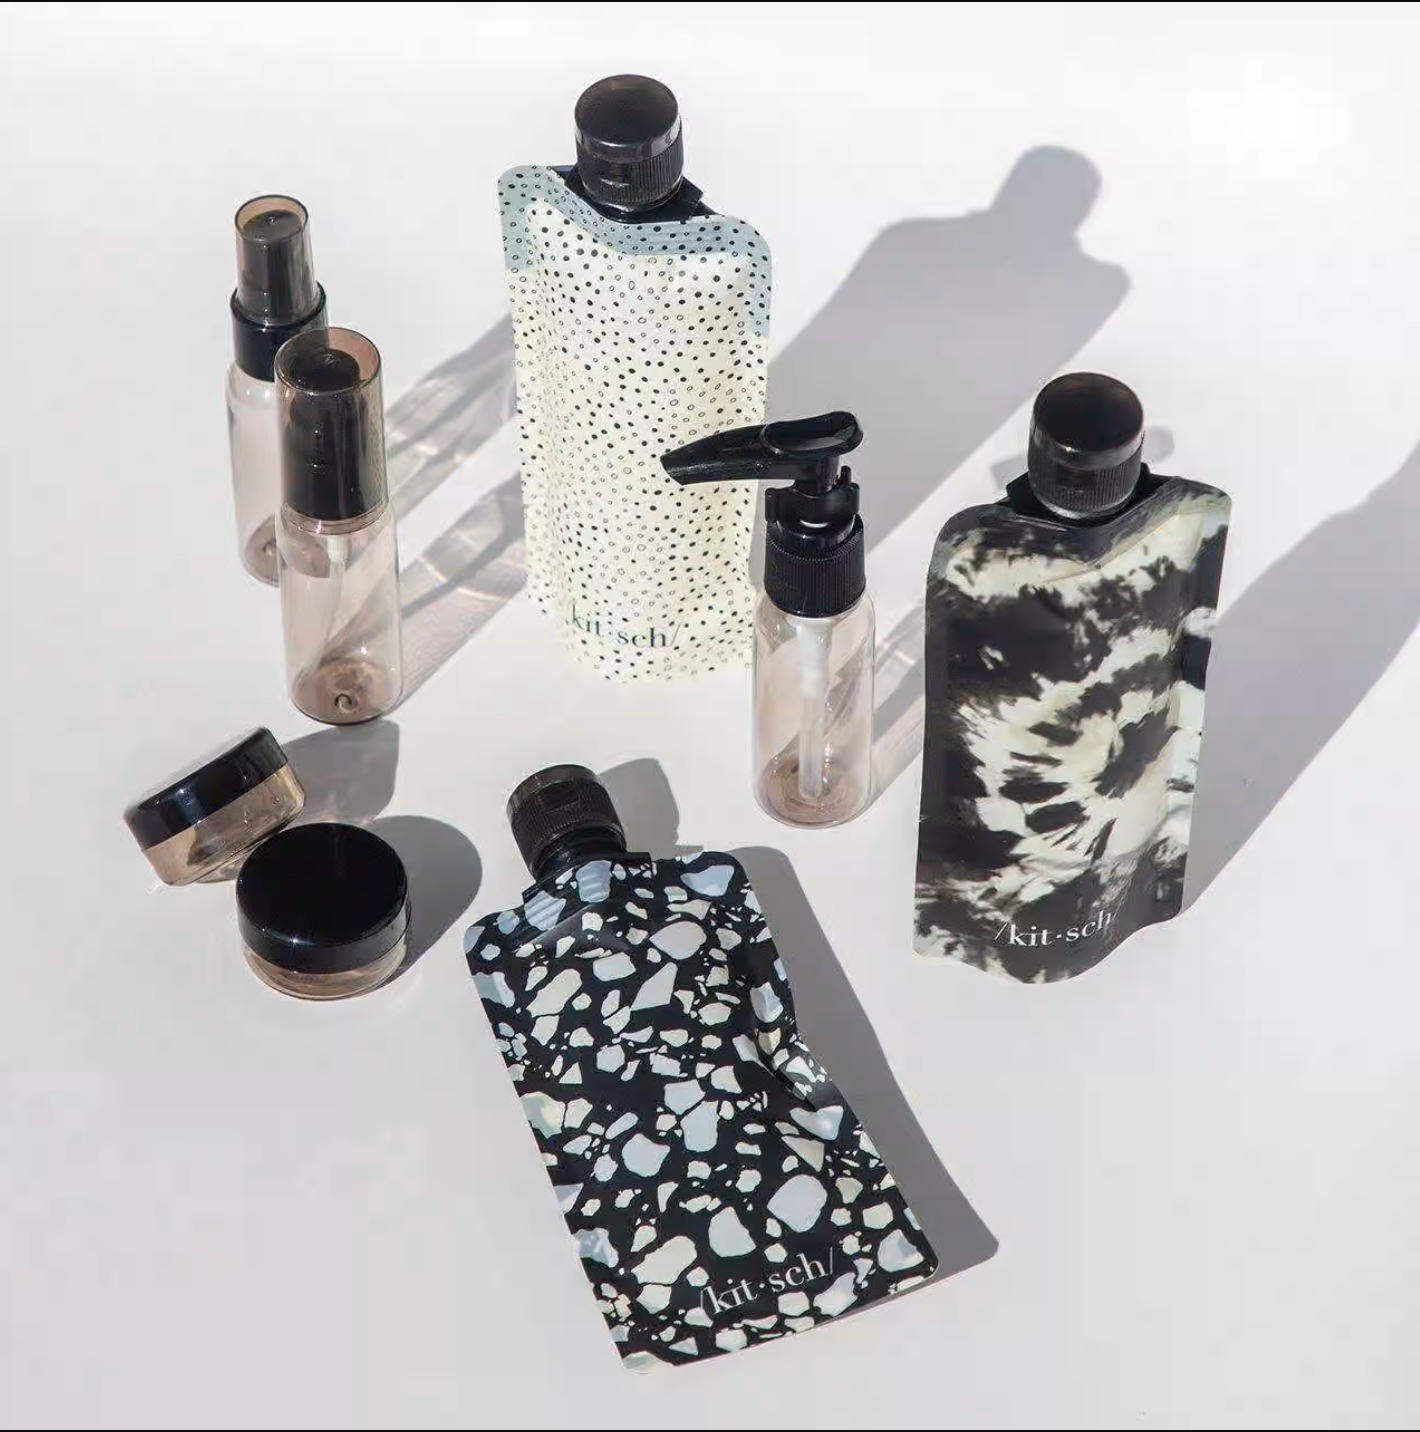 the different containers in black and white patterns and small pump bottle, two spray bottles, and two small containers